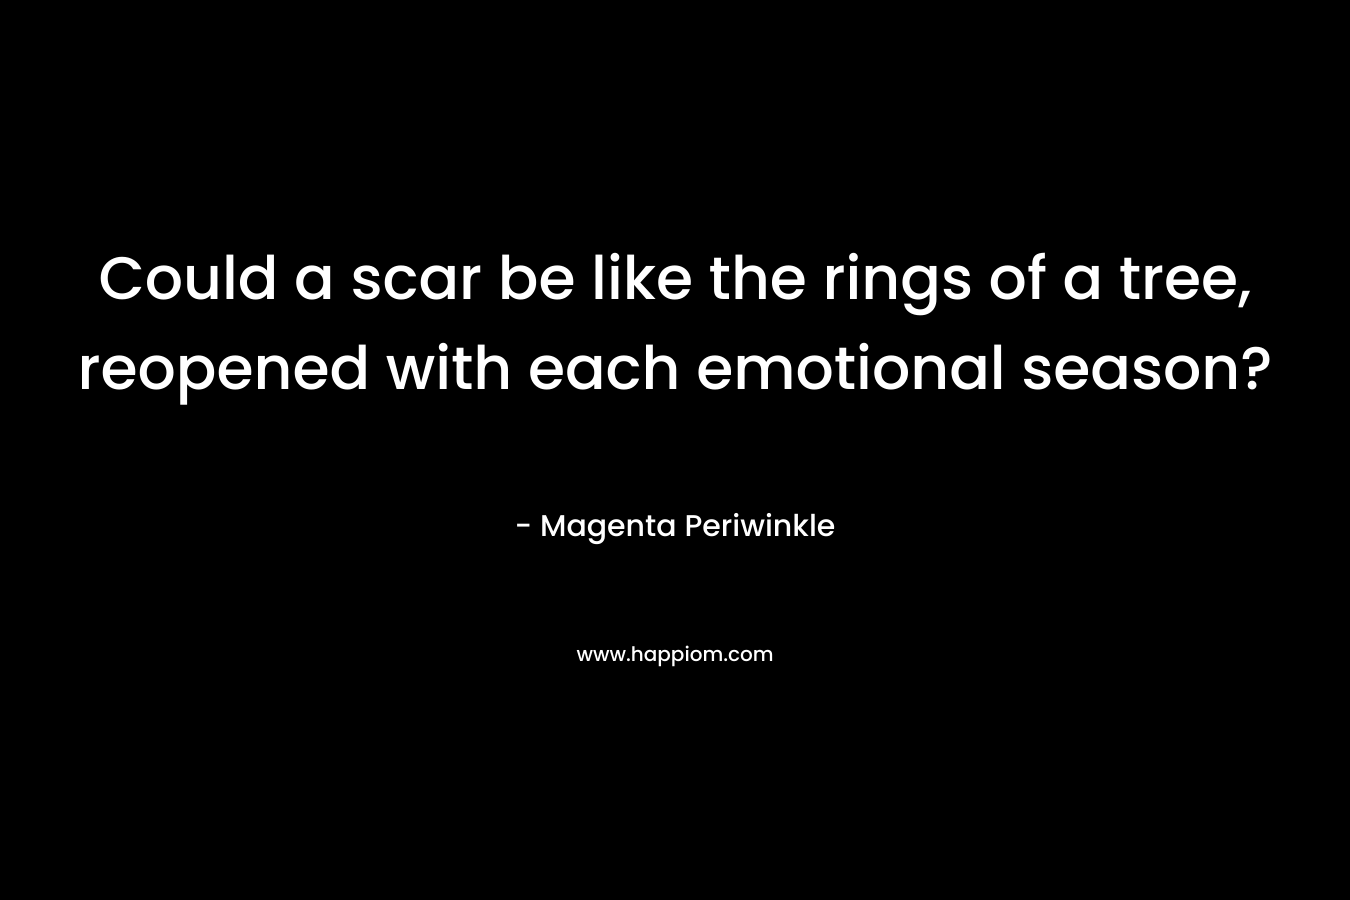 Could a scar be like the rings of a tree, reopened with each emotional season? – Magenta Periwinkle